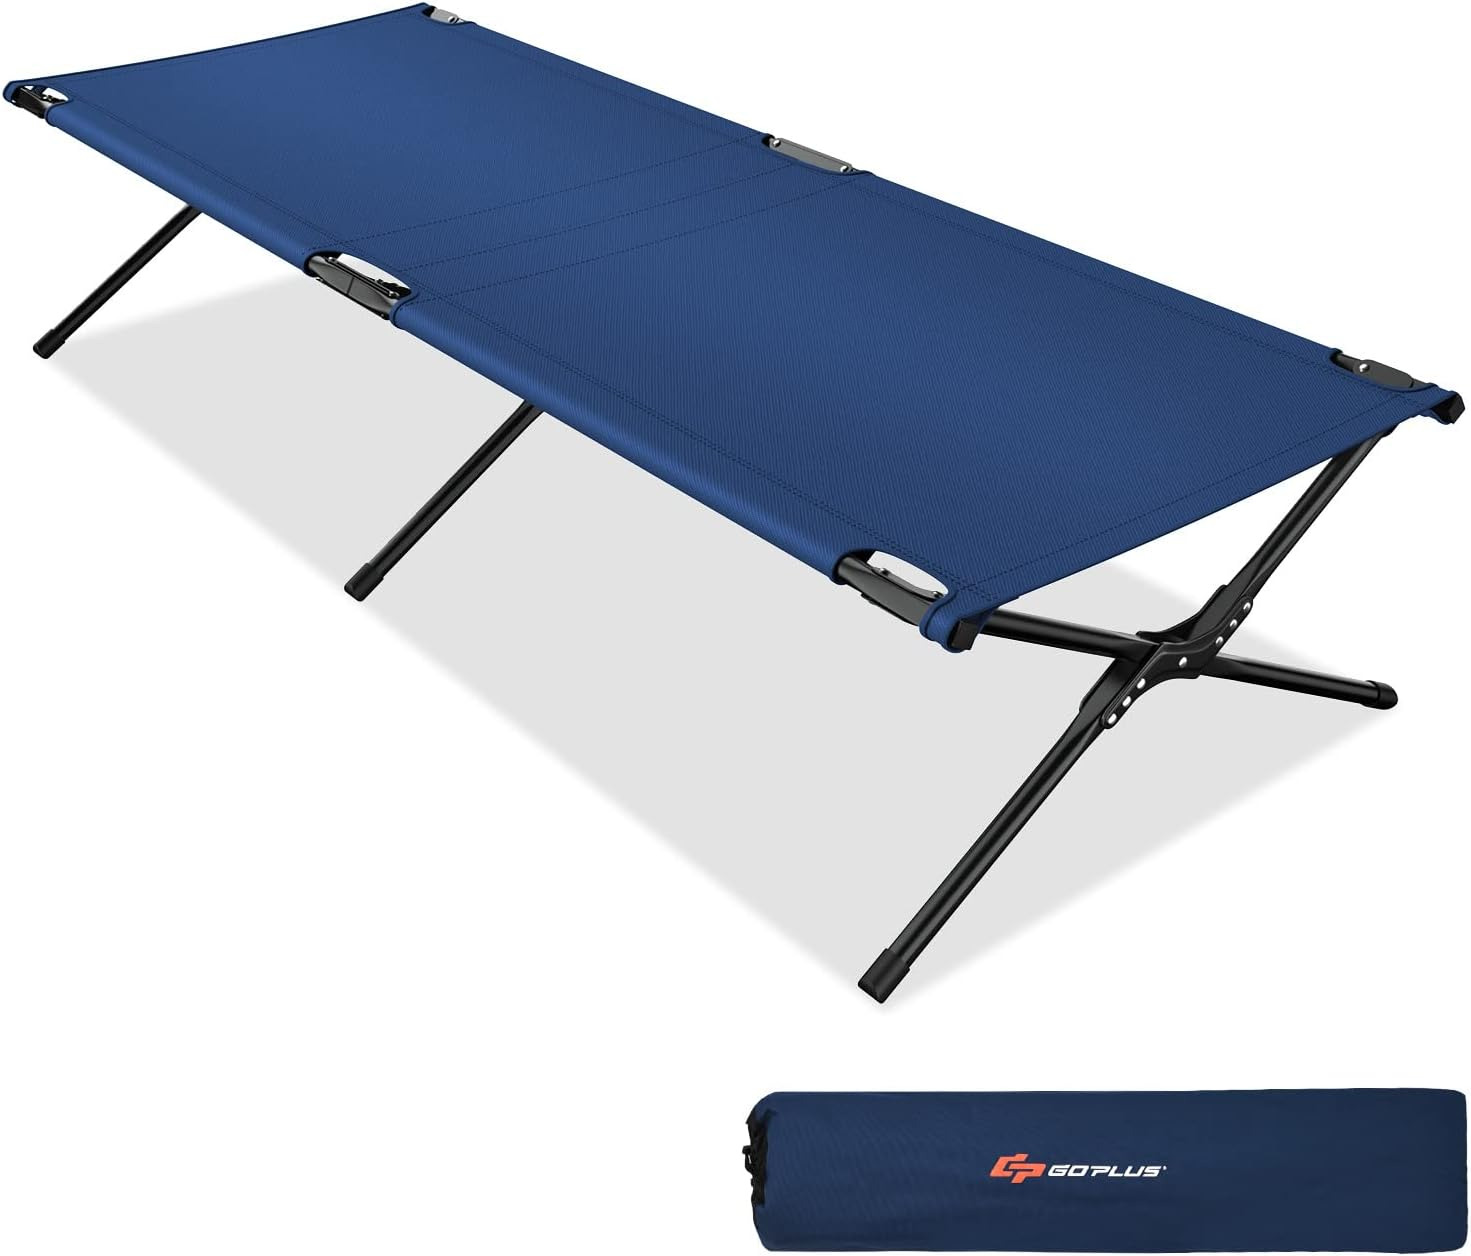 Goplus Folding Camping Cot with Carrying Bag, Portable Lightweight Outdoor Sleep